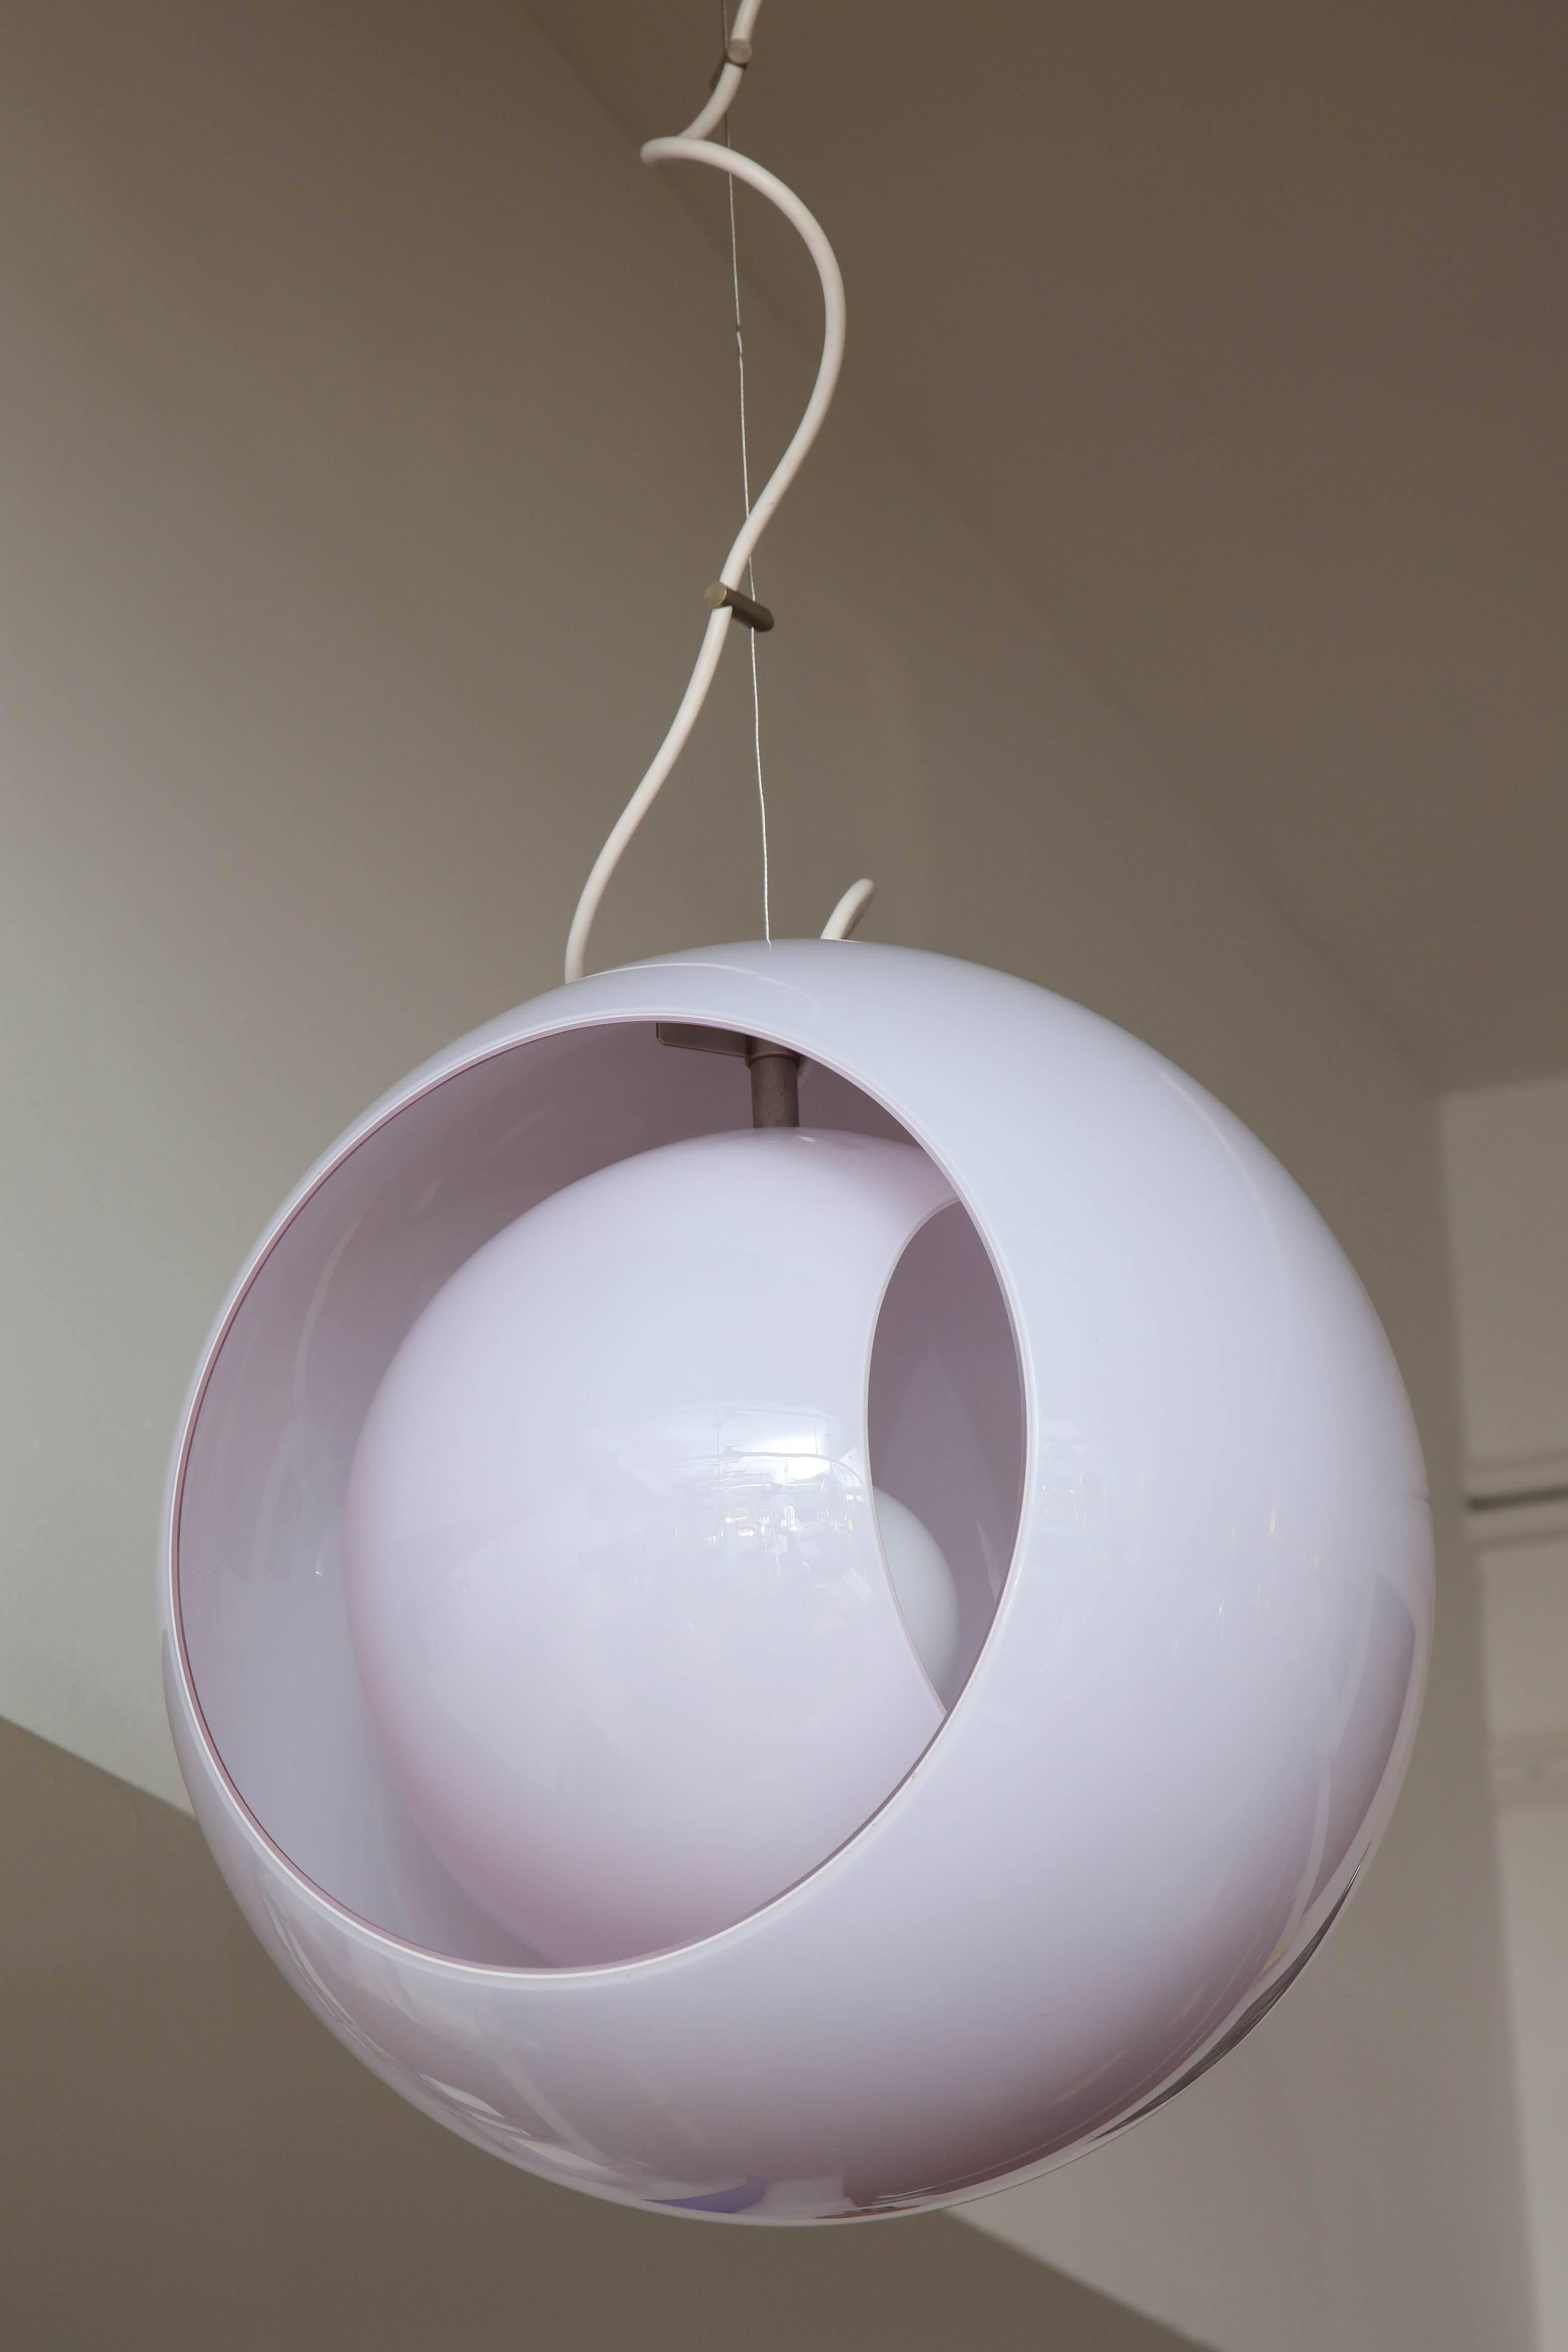 Vistosi pendent light italian designed by Gino Vistosi In Excellent Condition For Sale In New York, NY